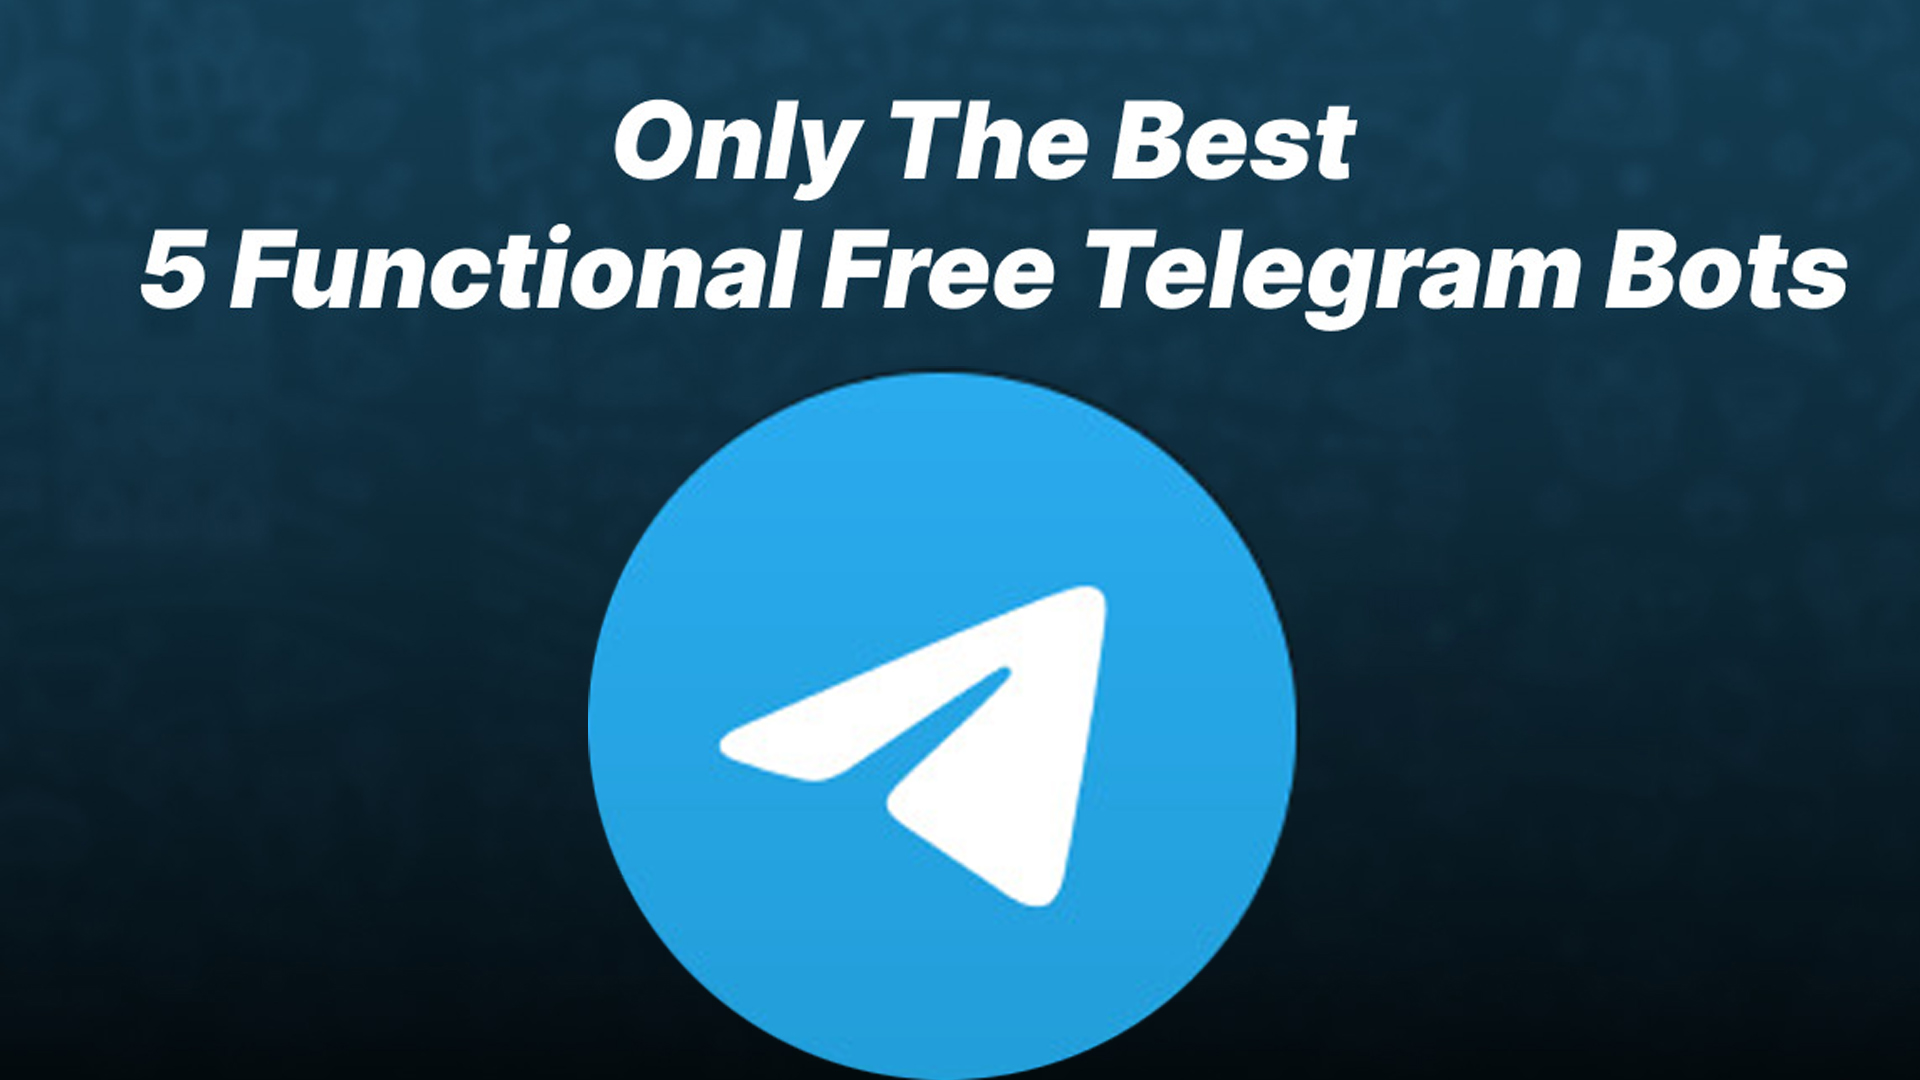 Only The Best 5 Functional Free Telegram Bots